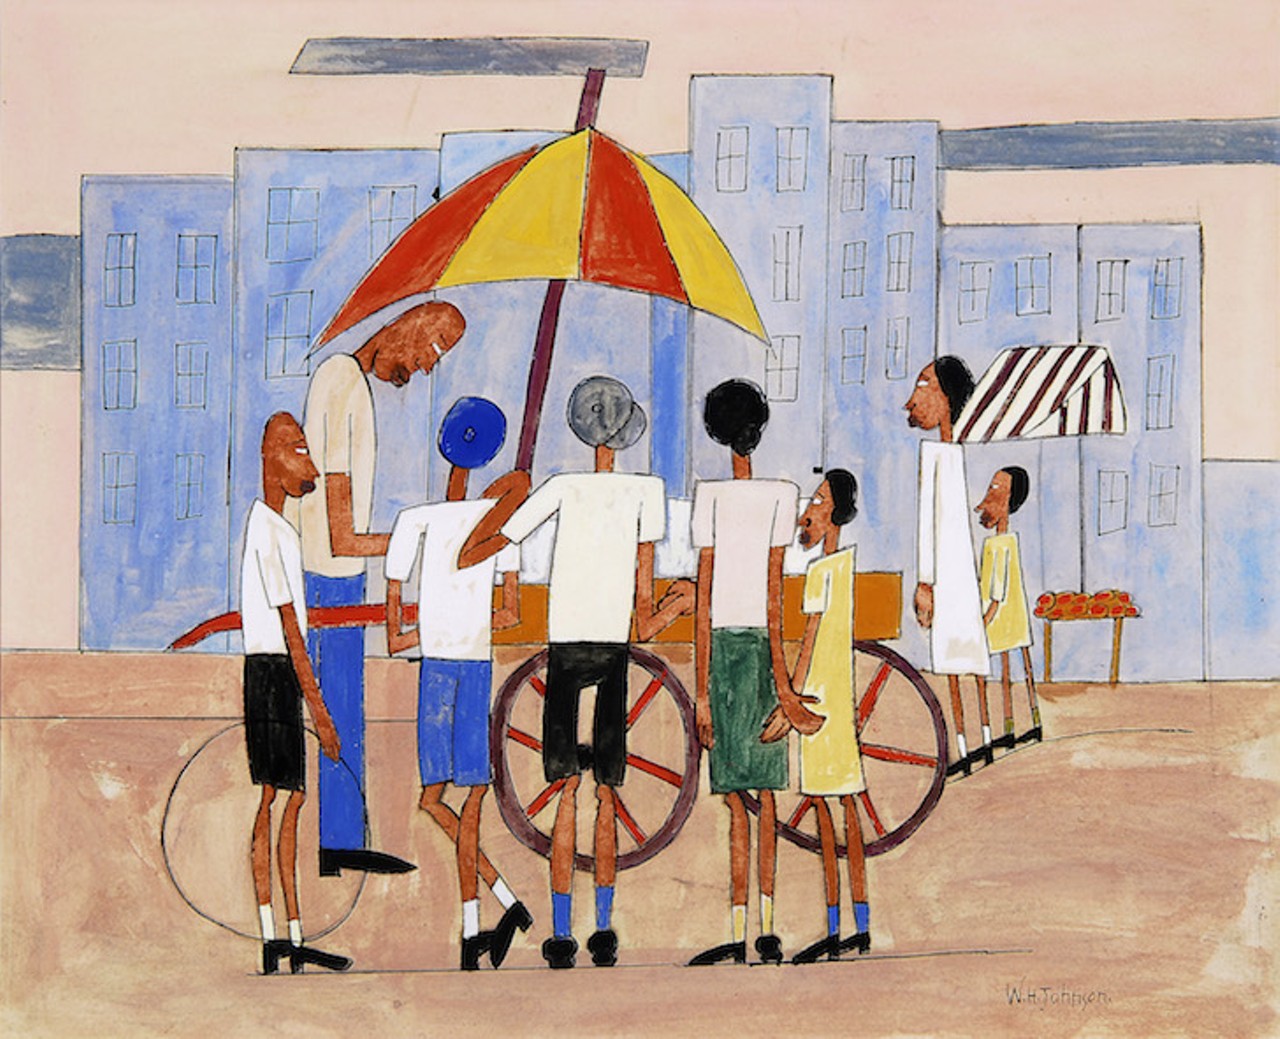 William Henry Johnson, Ice Cream Stand, ca. 1939 – 42. Gouache, ink, and pencil on paper.